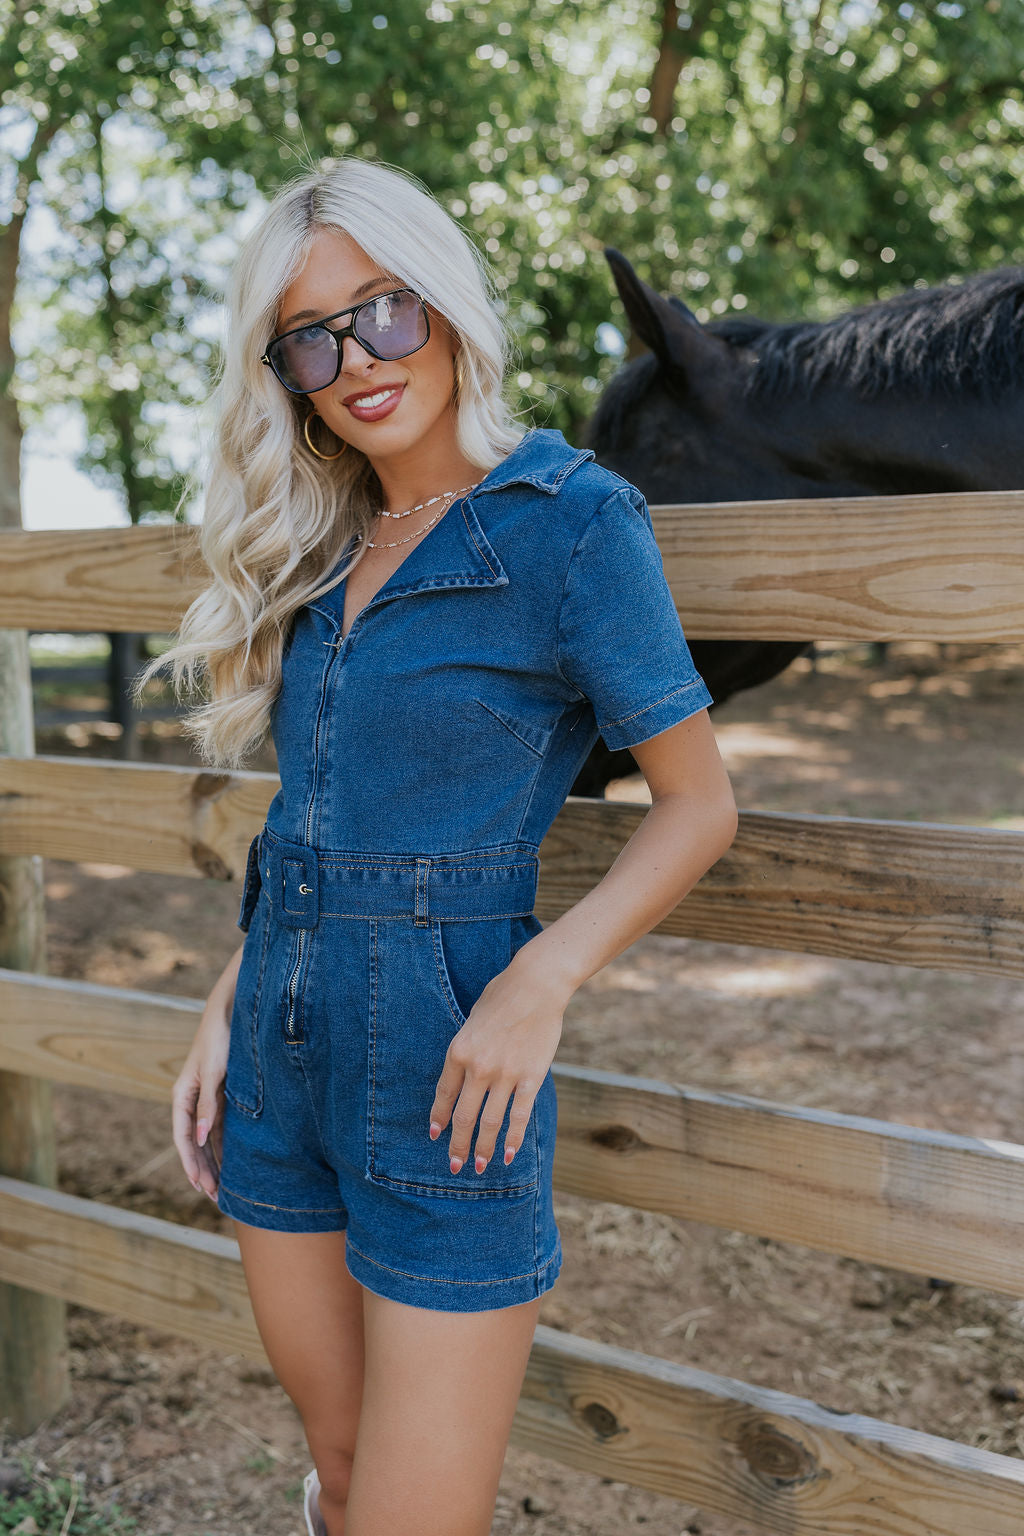 Front view of female model wearing the Mavis Denim Short Sleeve Zip-Up Romper in Medium Wash which features Denim Fabric, Two Front Pockets, Front Zipper Closure, Adjustable Monochrome Belt with Loops, Collared Neckline and Short Sleeves